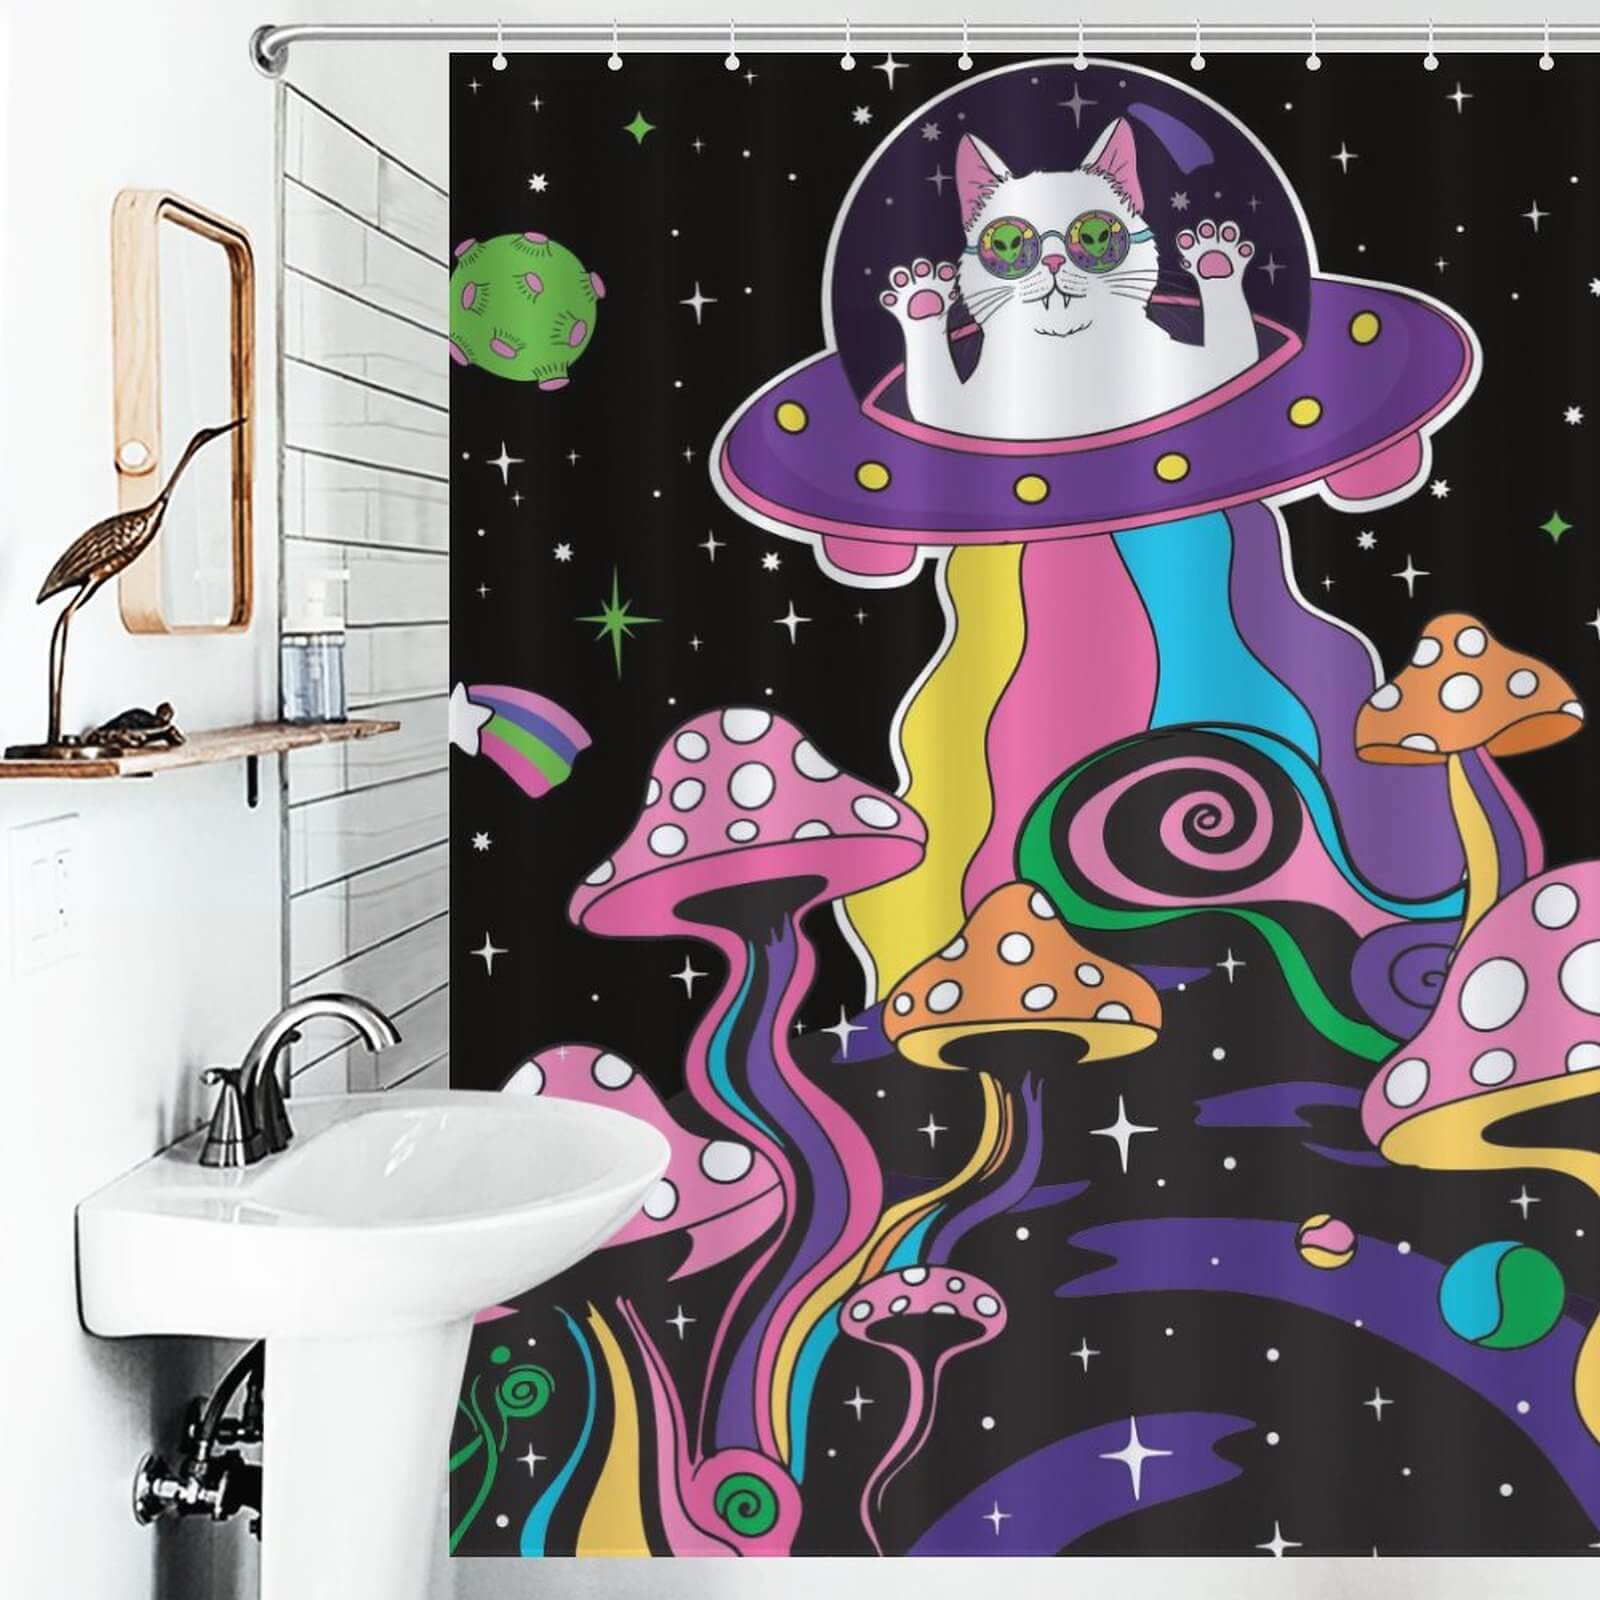 Add a touch of humor to your bathroom with this Mushroom Trippy Shower Curtain-Cottoncat from the Cotton Cat brand, featuring a cat in a spaceship.